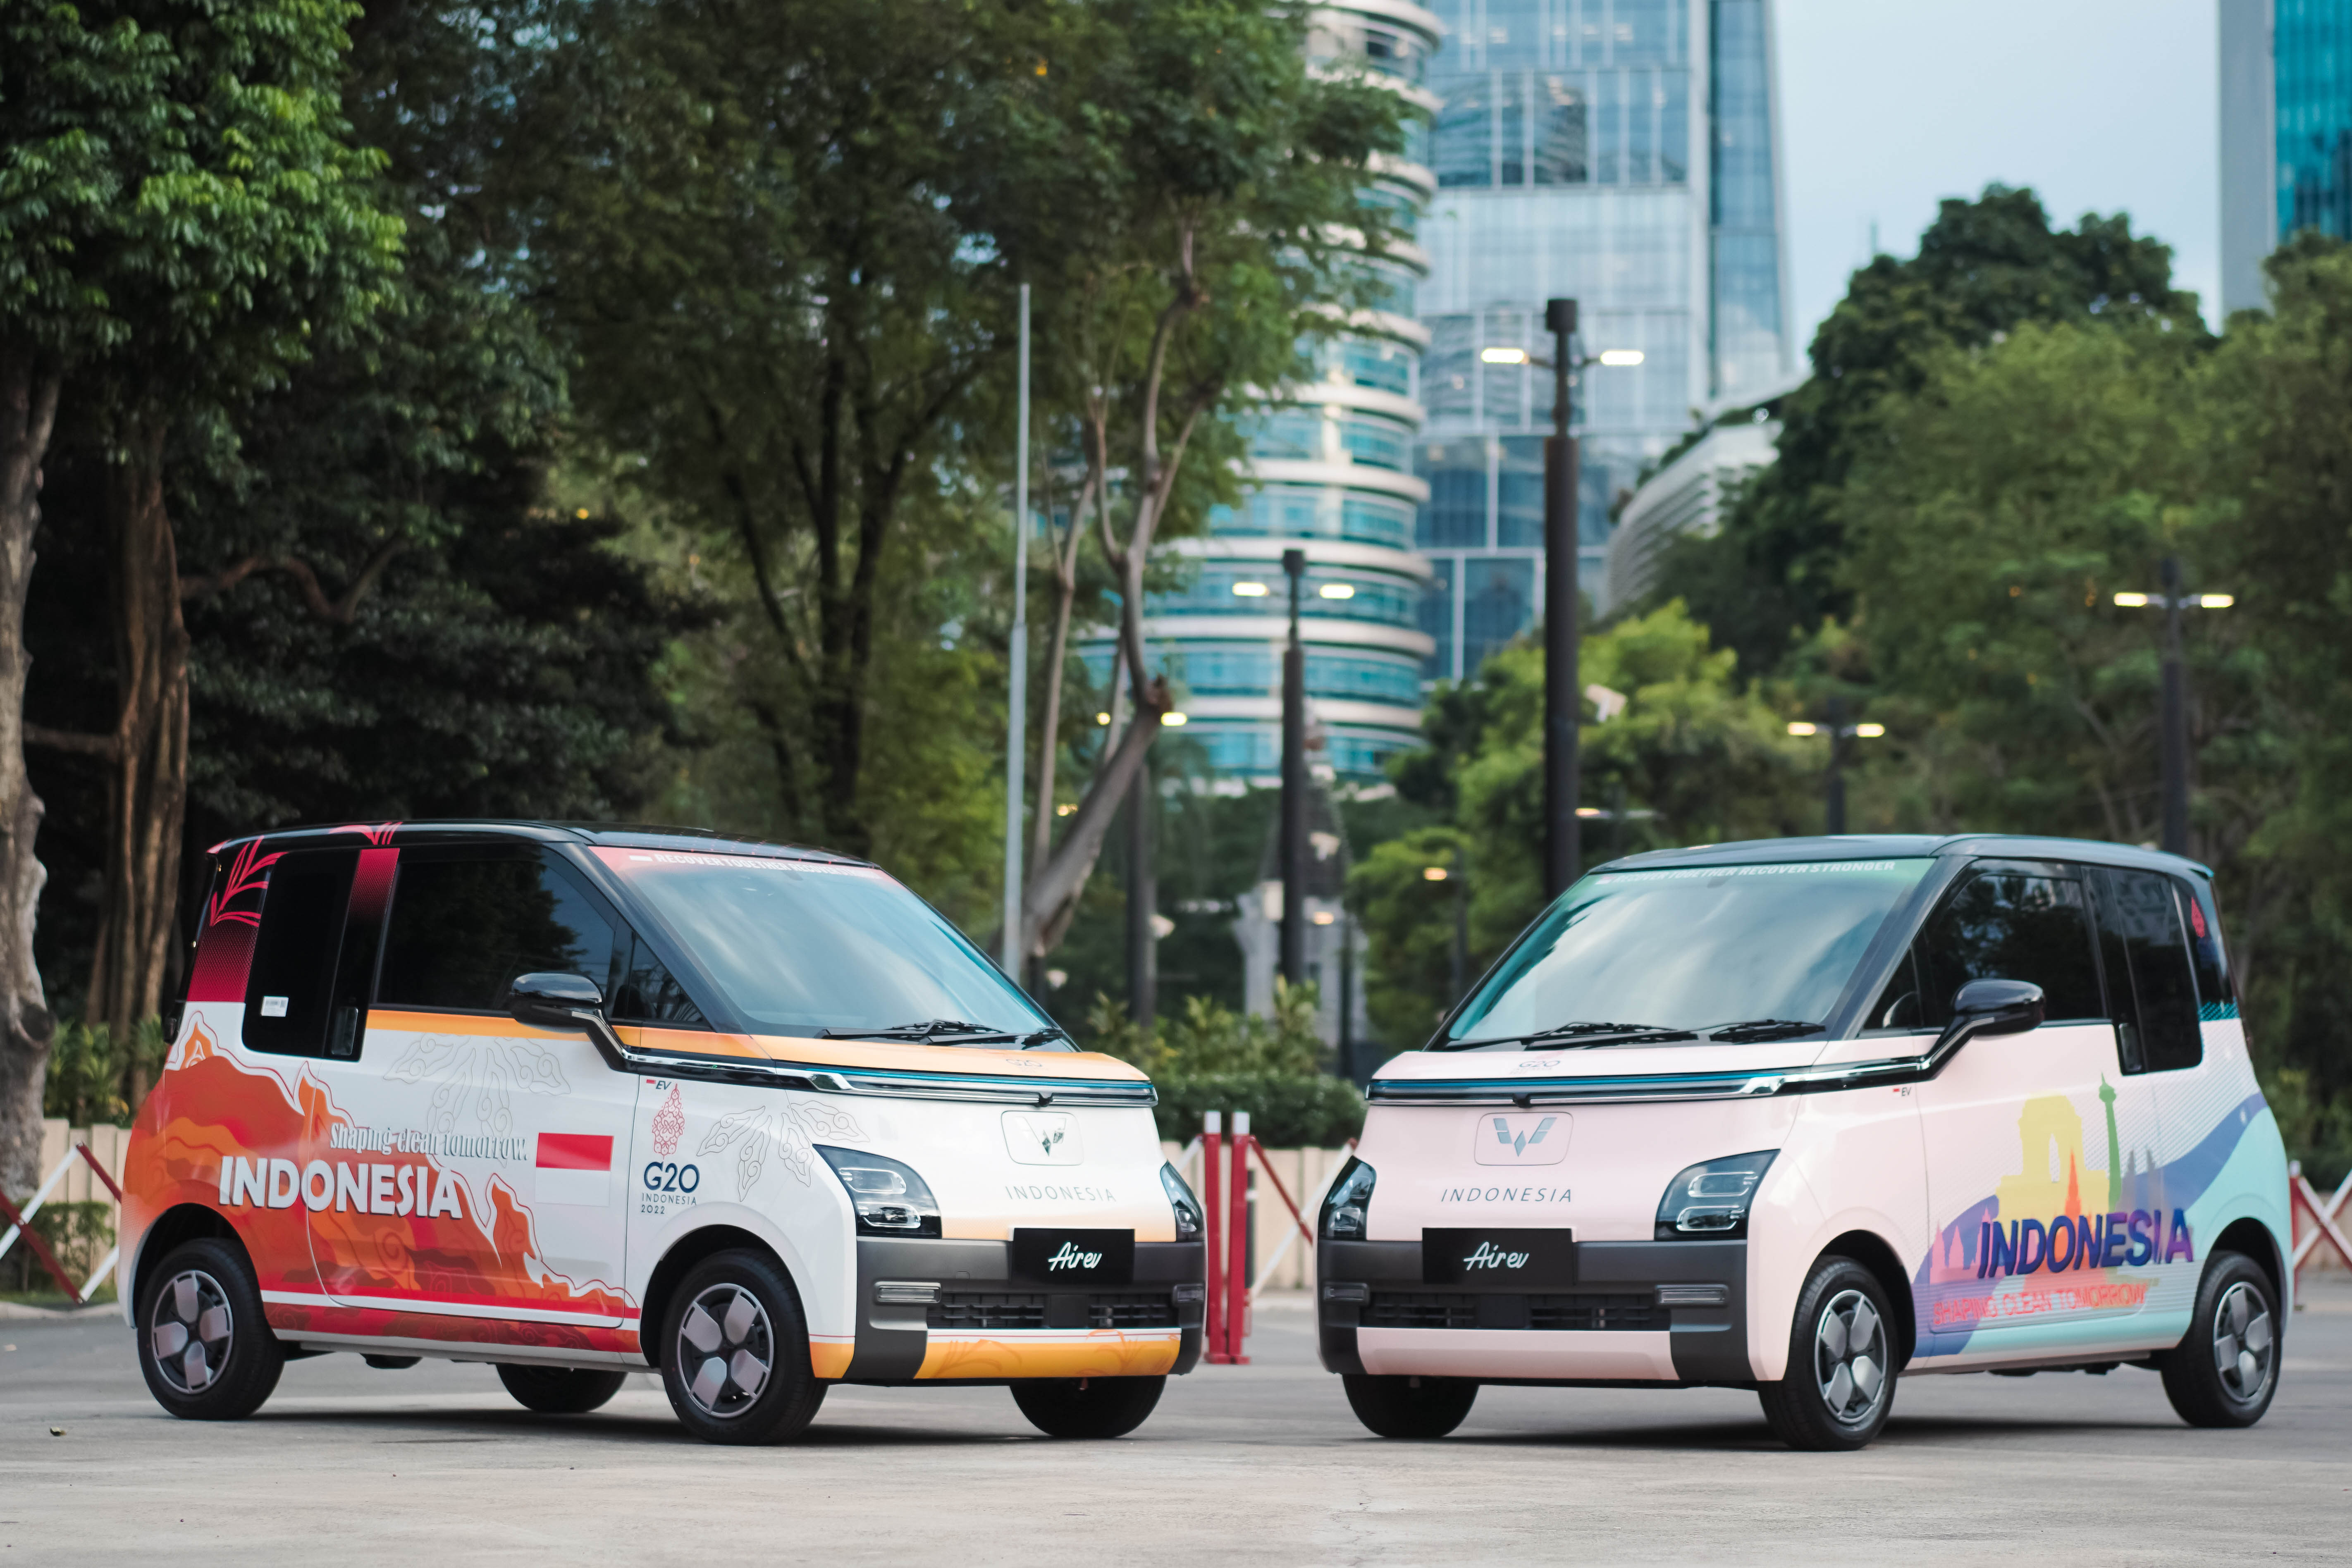 Image Wuling Uses Special Livery for 300 Air ev as The Official Car G20 Summit